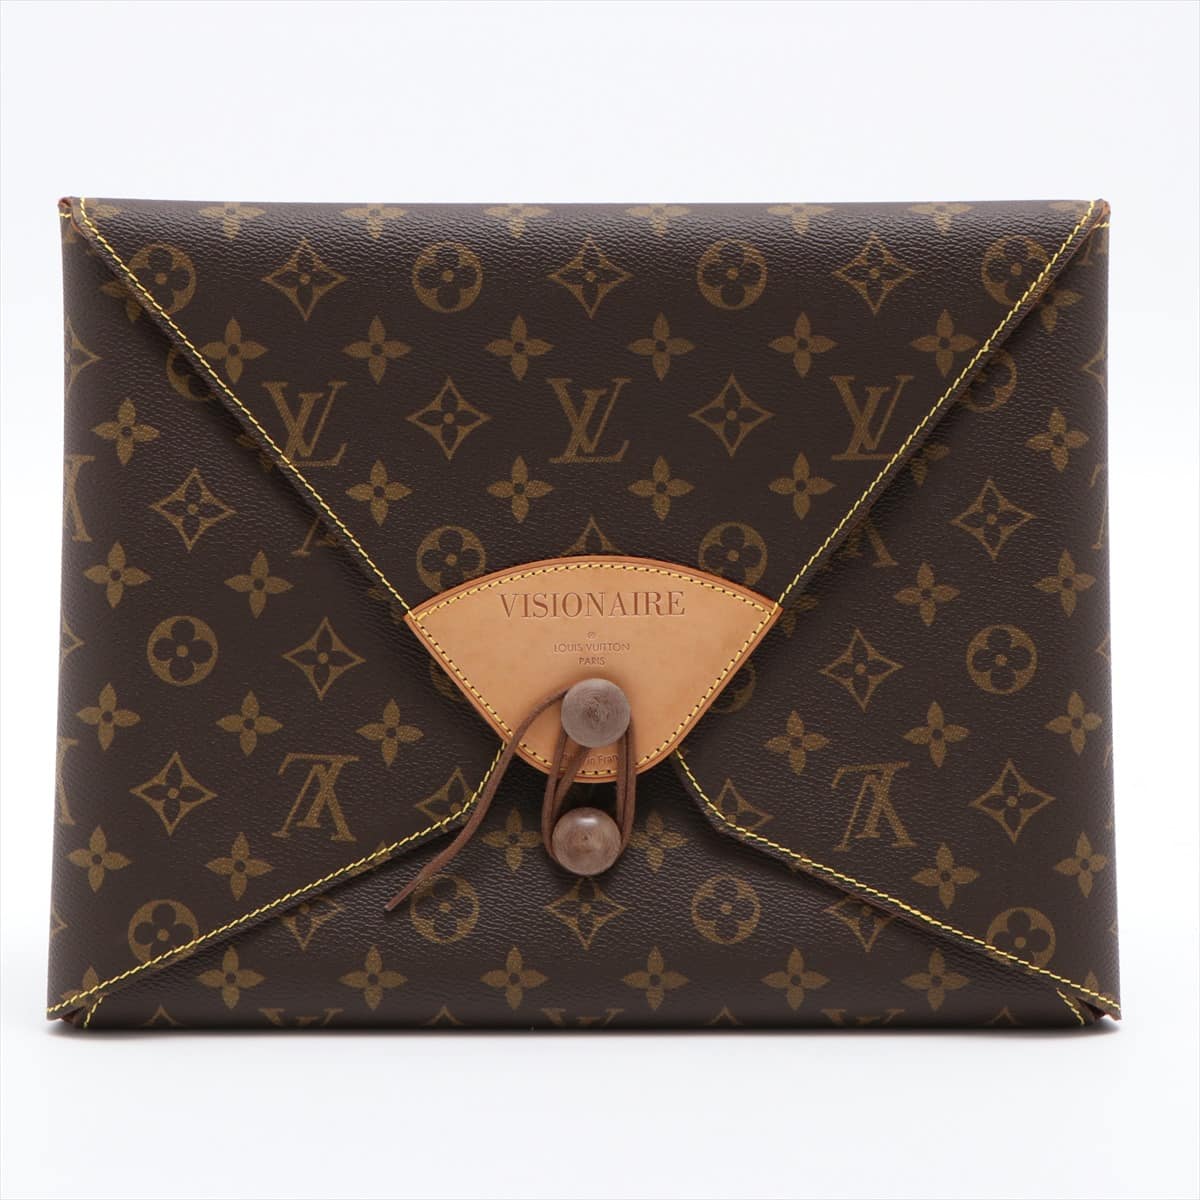 Louis Vuitton Monogram Visionaire 30 M99045 Limited to the 100th anniversary